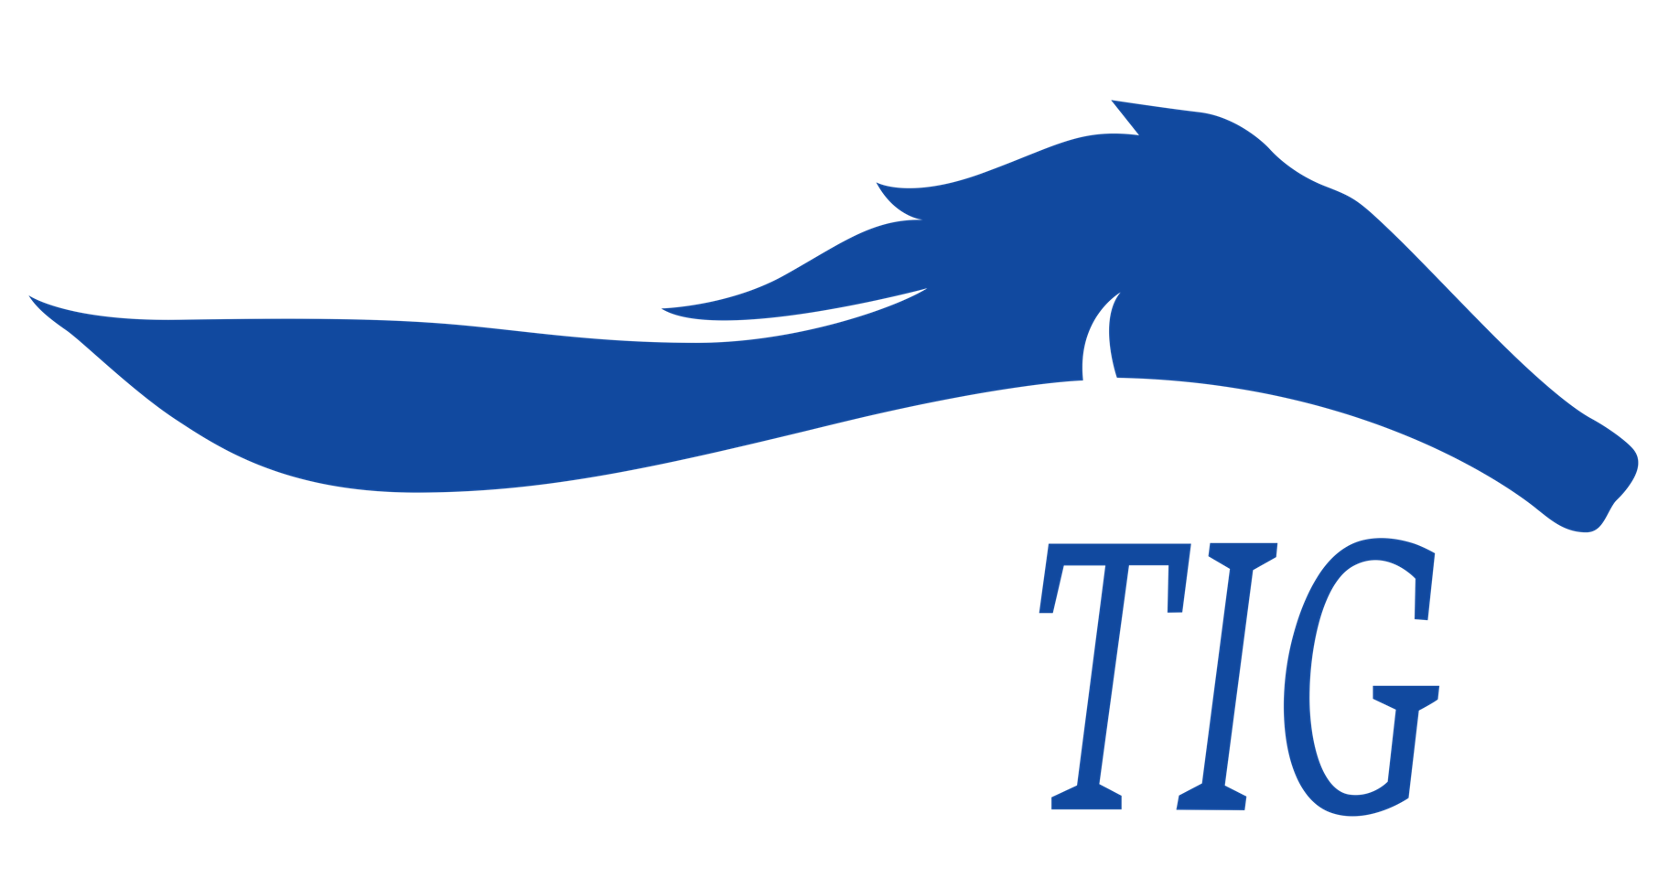 Thoroughbred Investment Group